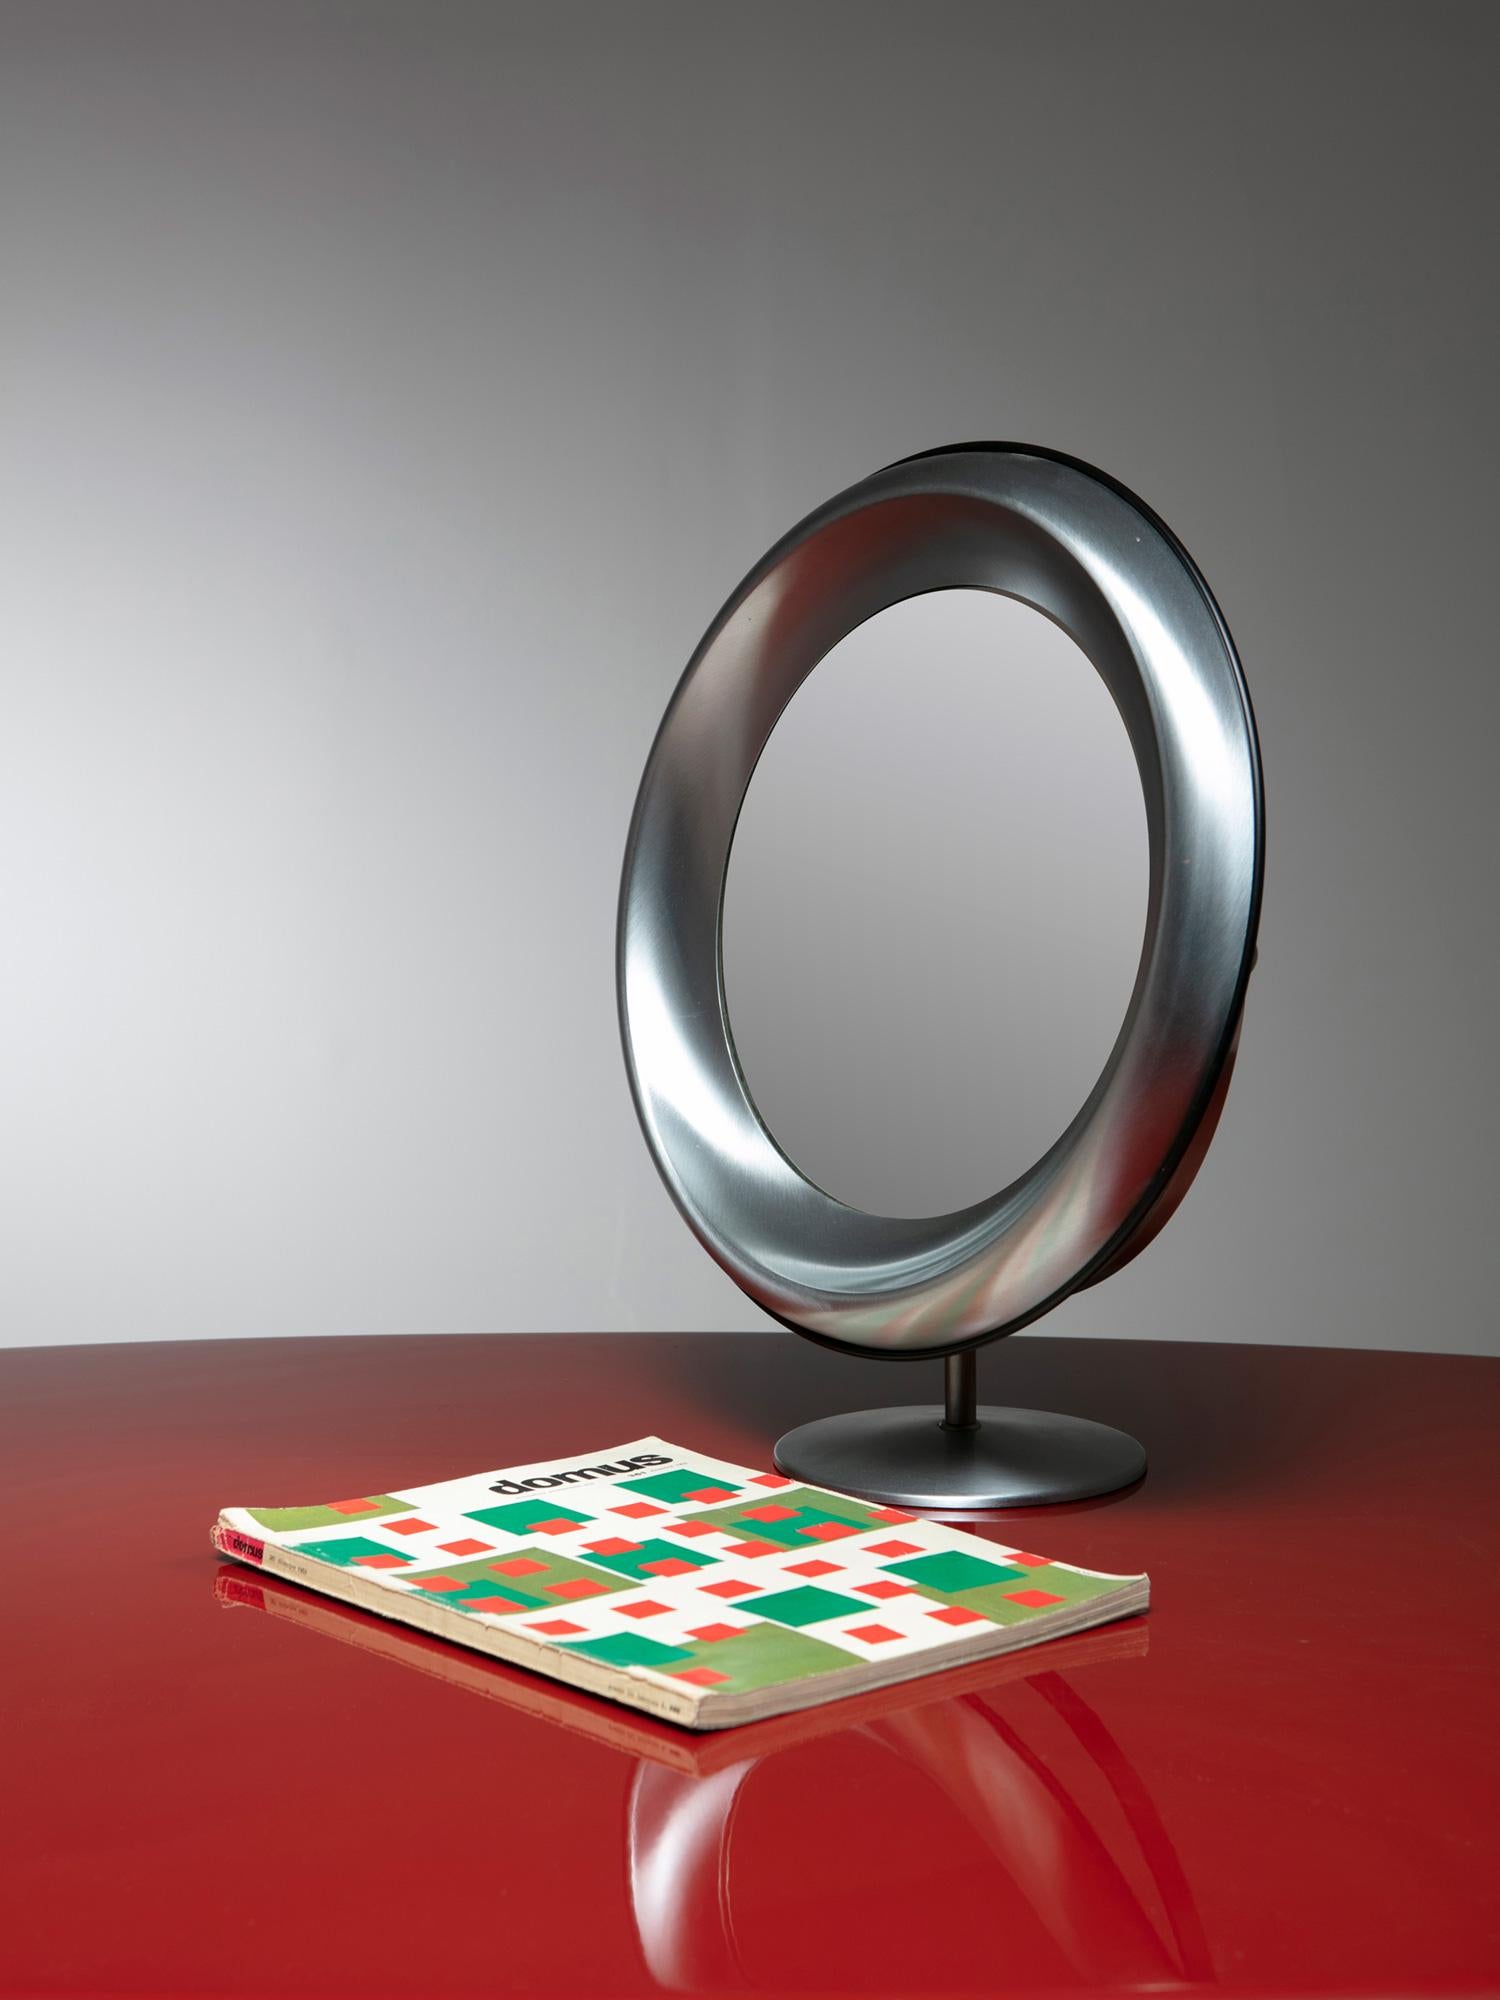 Steel Set of Two Adjustable Table Mirrors by Missaglia, Italy, 1970s For Sale